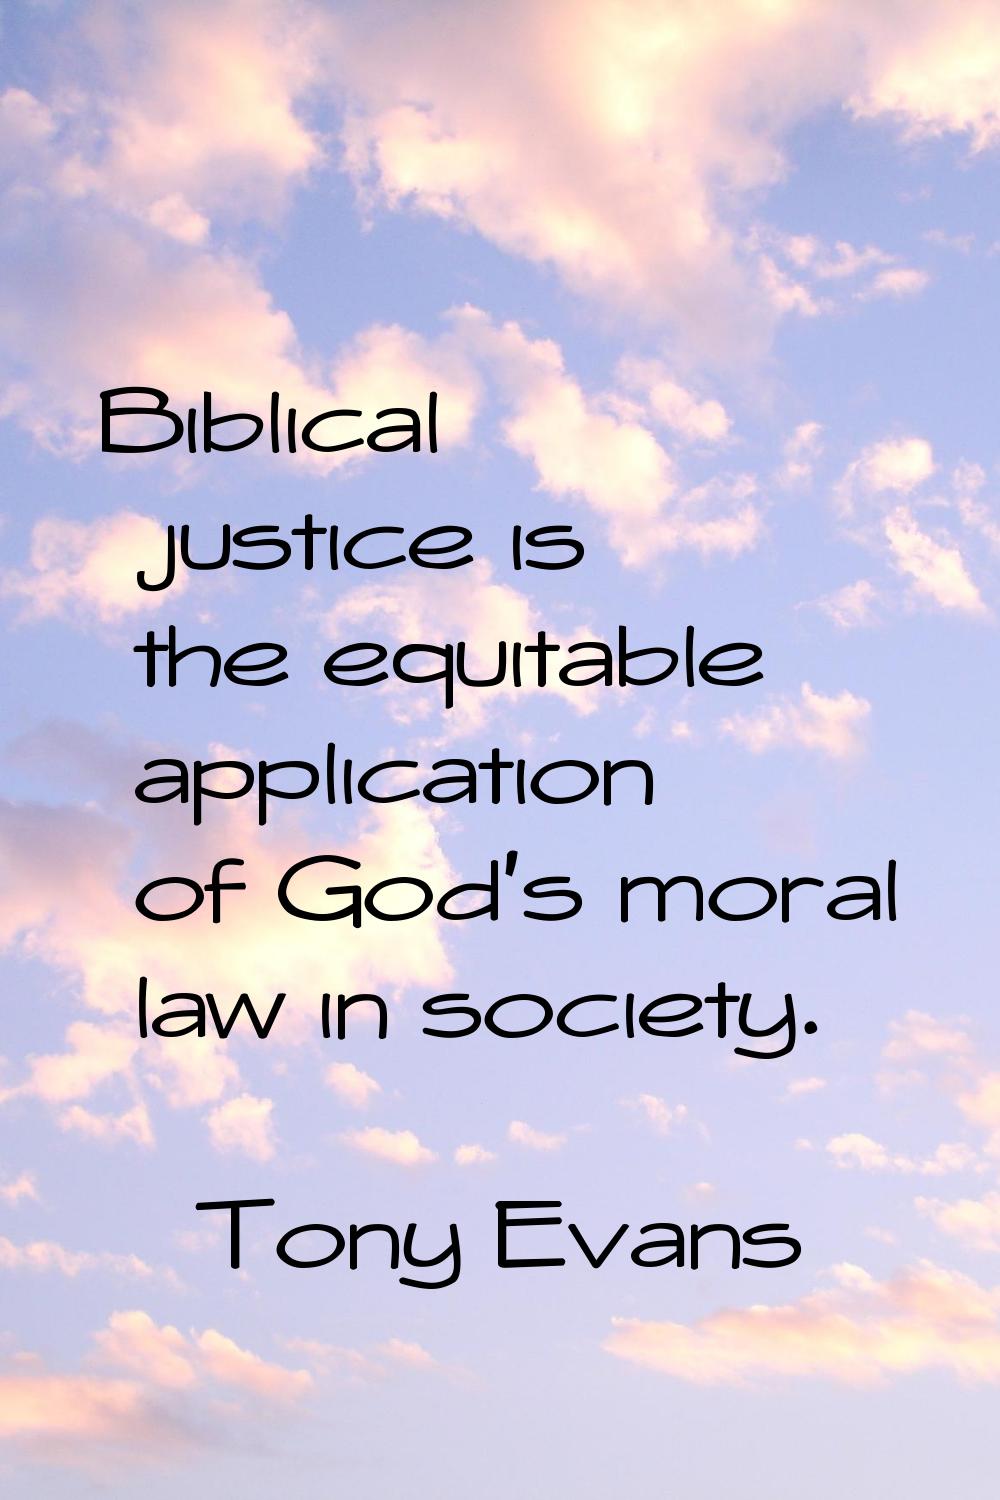 Biblical justice is the equitable application of God's moral law in society.